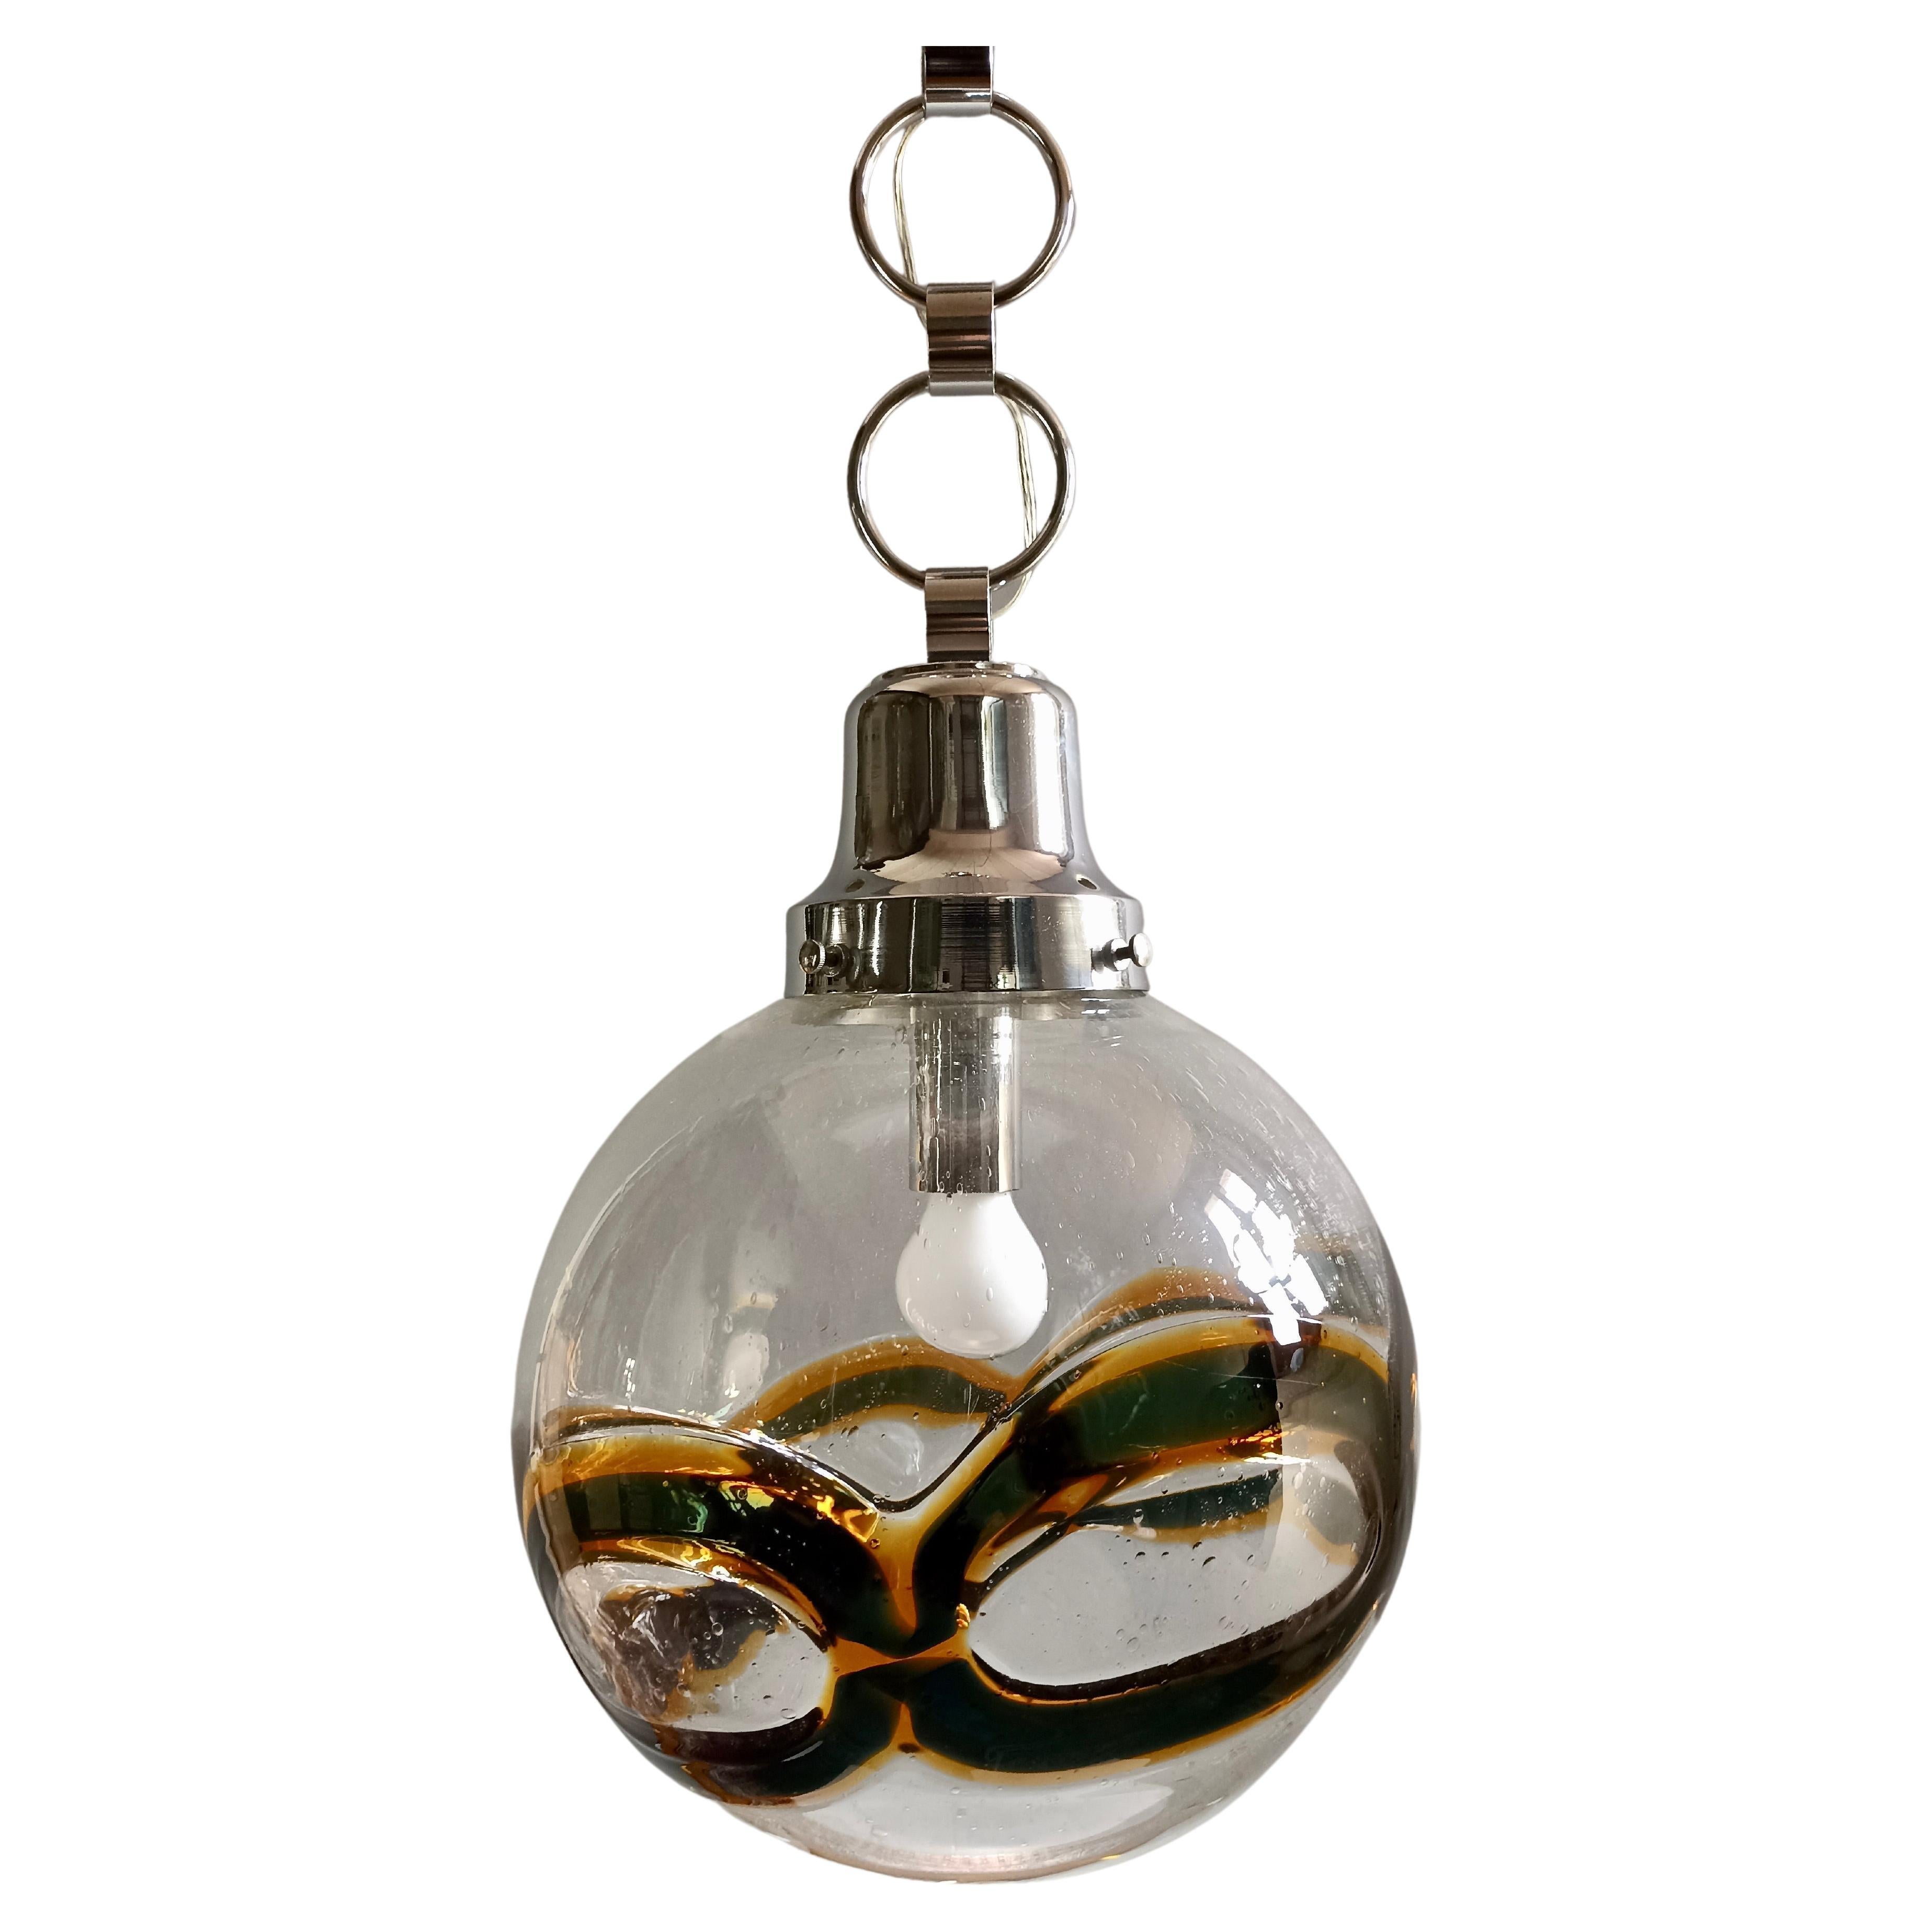 Fascinating and rare large vintage Toni Zuccheri attributable Space Age Murano art glass pendant lamp from the 1960s/70s.
The hand-blown glass shade is transparent with a fine 'Pulegoso' workmanship and an irregular yellow/orange and dark green